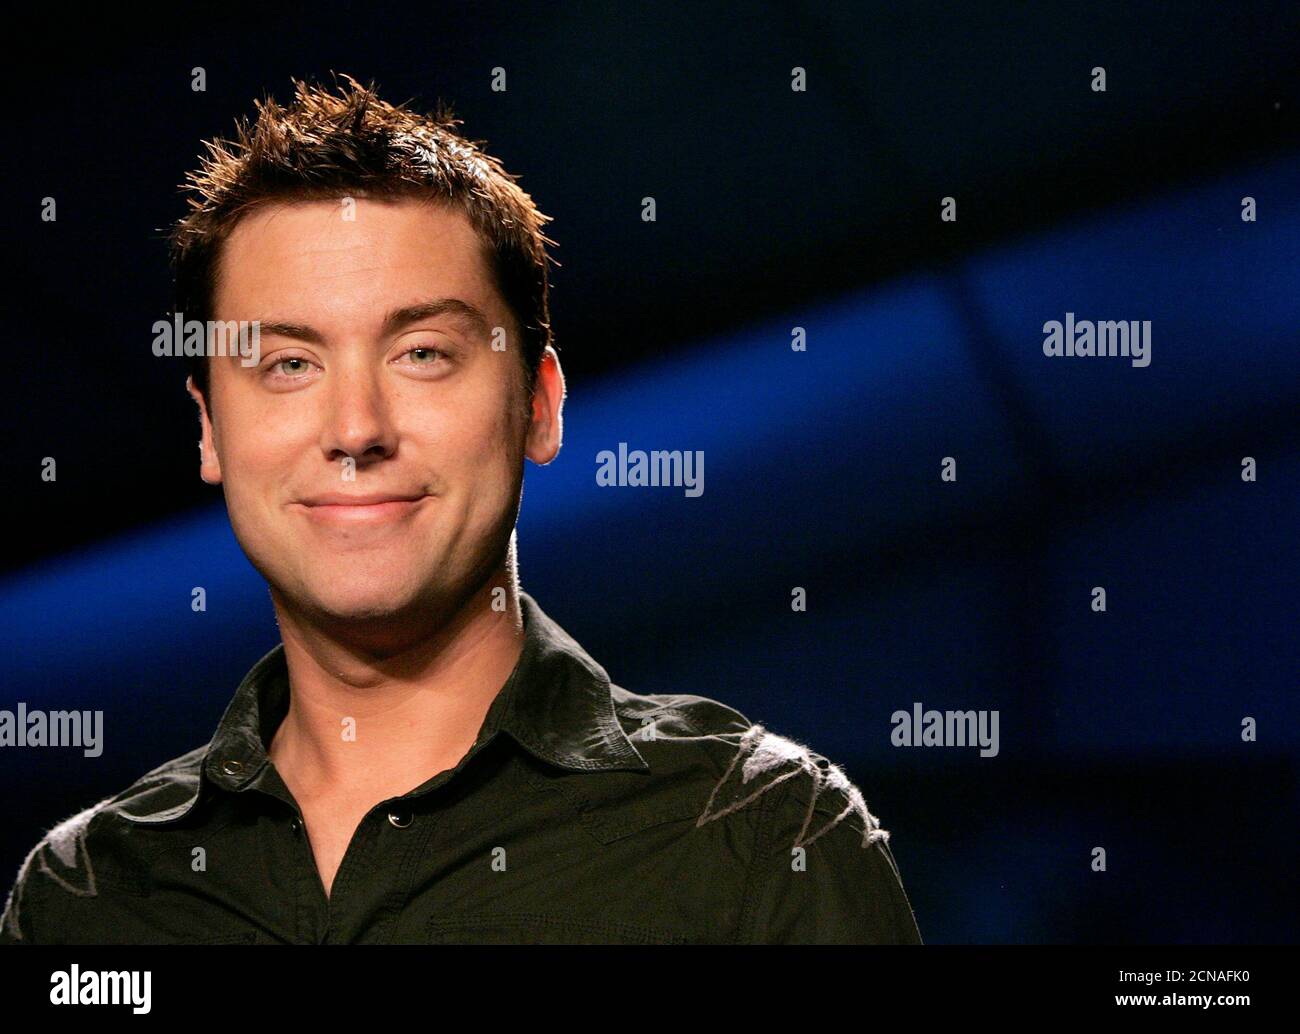 Singer Lance Bass from the pop group 'N Sync attends the Nautica Spring 2008 Collection during New York Fashion Week September 5, 2007.     REUTERS/Brendan McDermid (UNITED STATES) Stock Photo